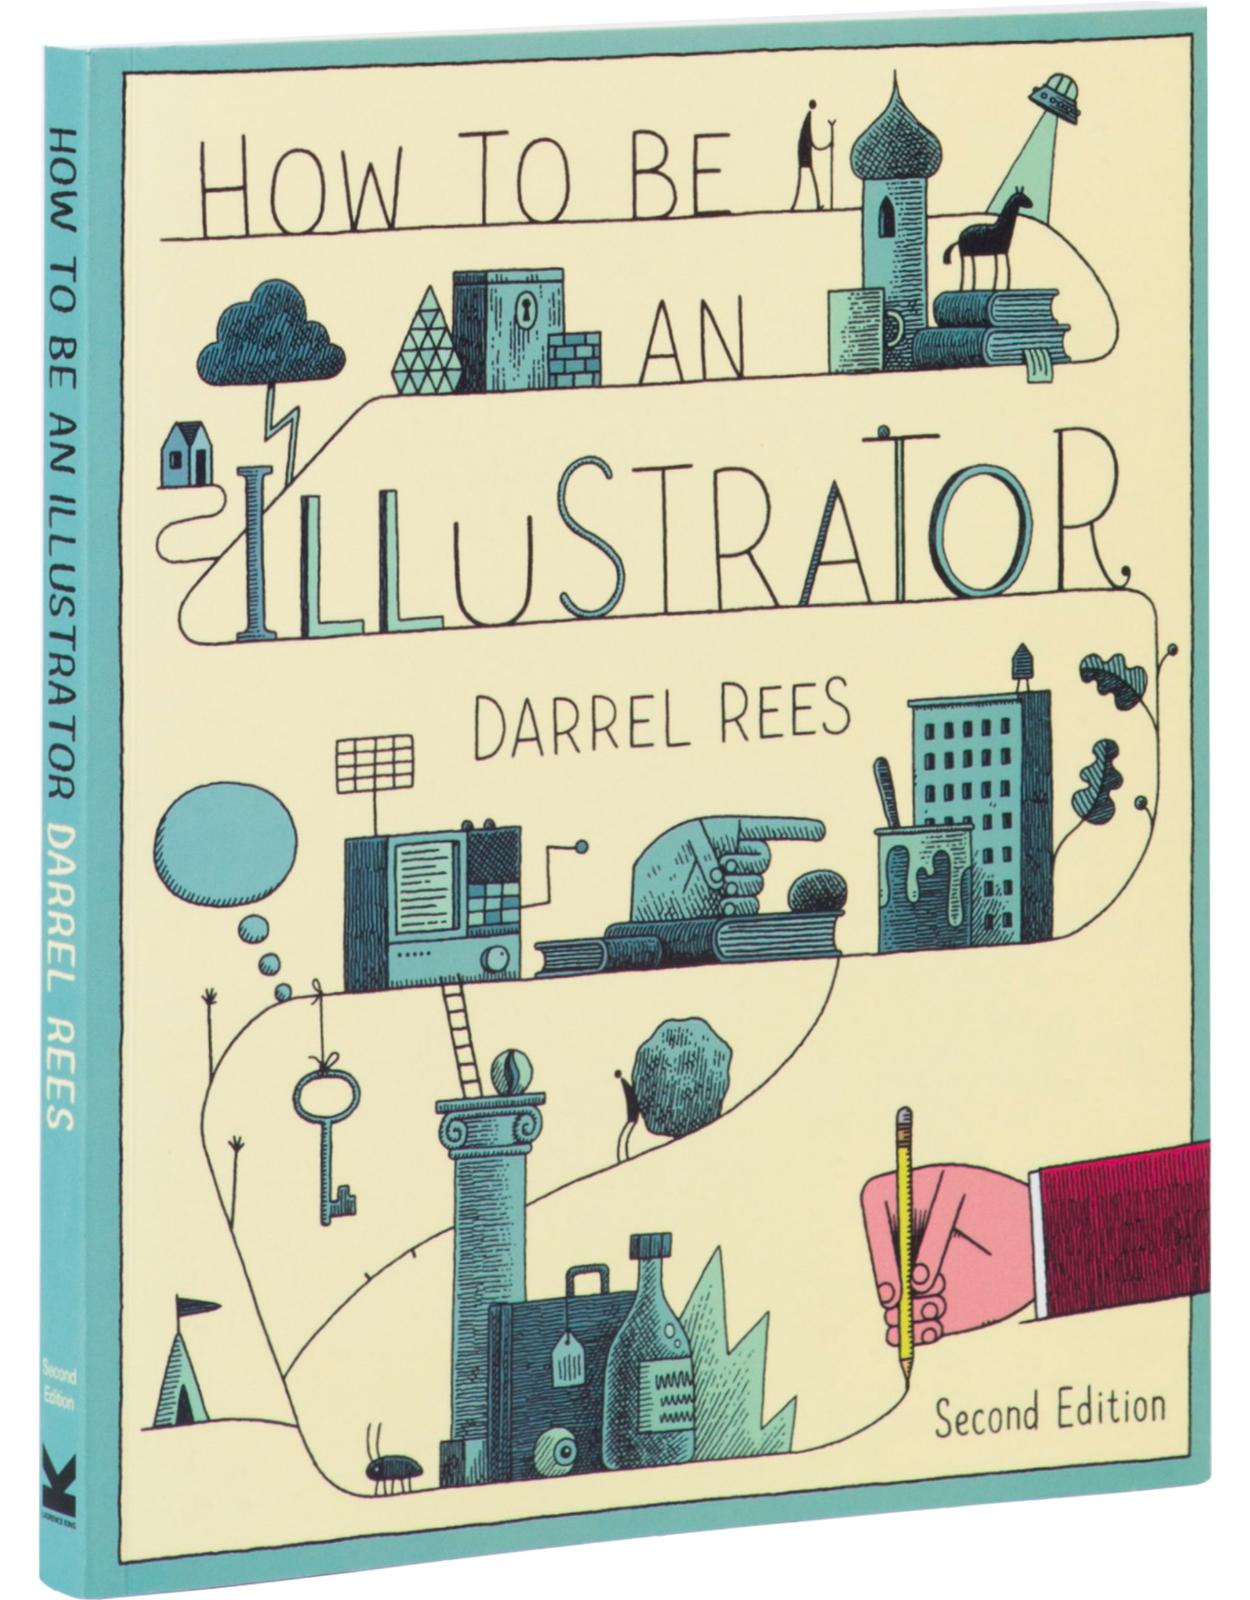 How to be an Illustrator (Second Edition)